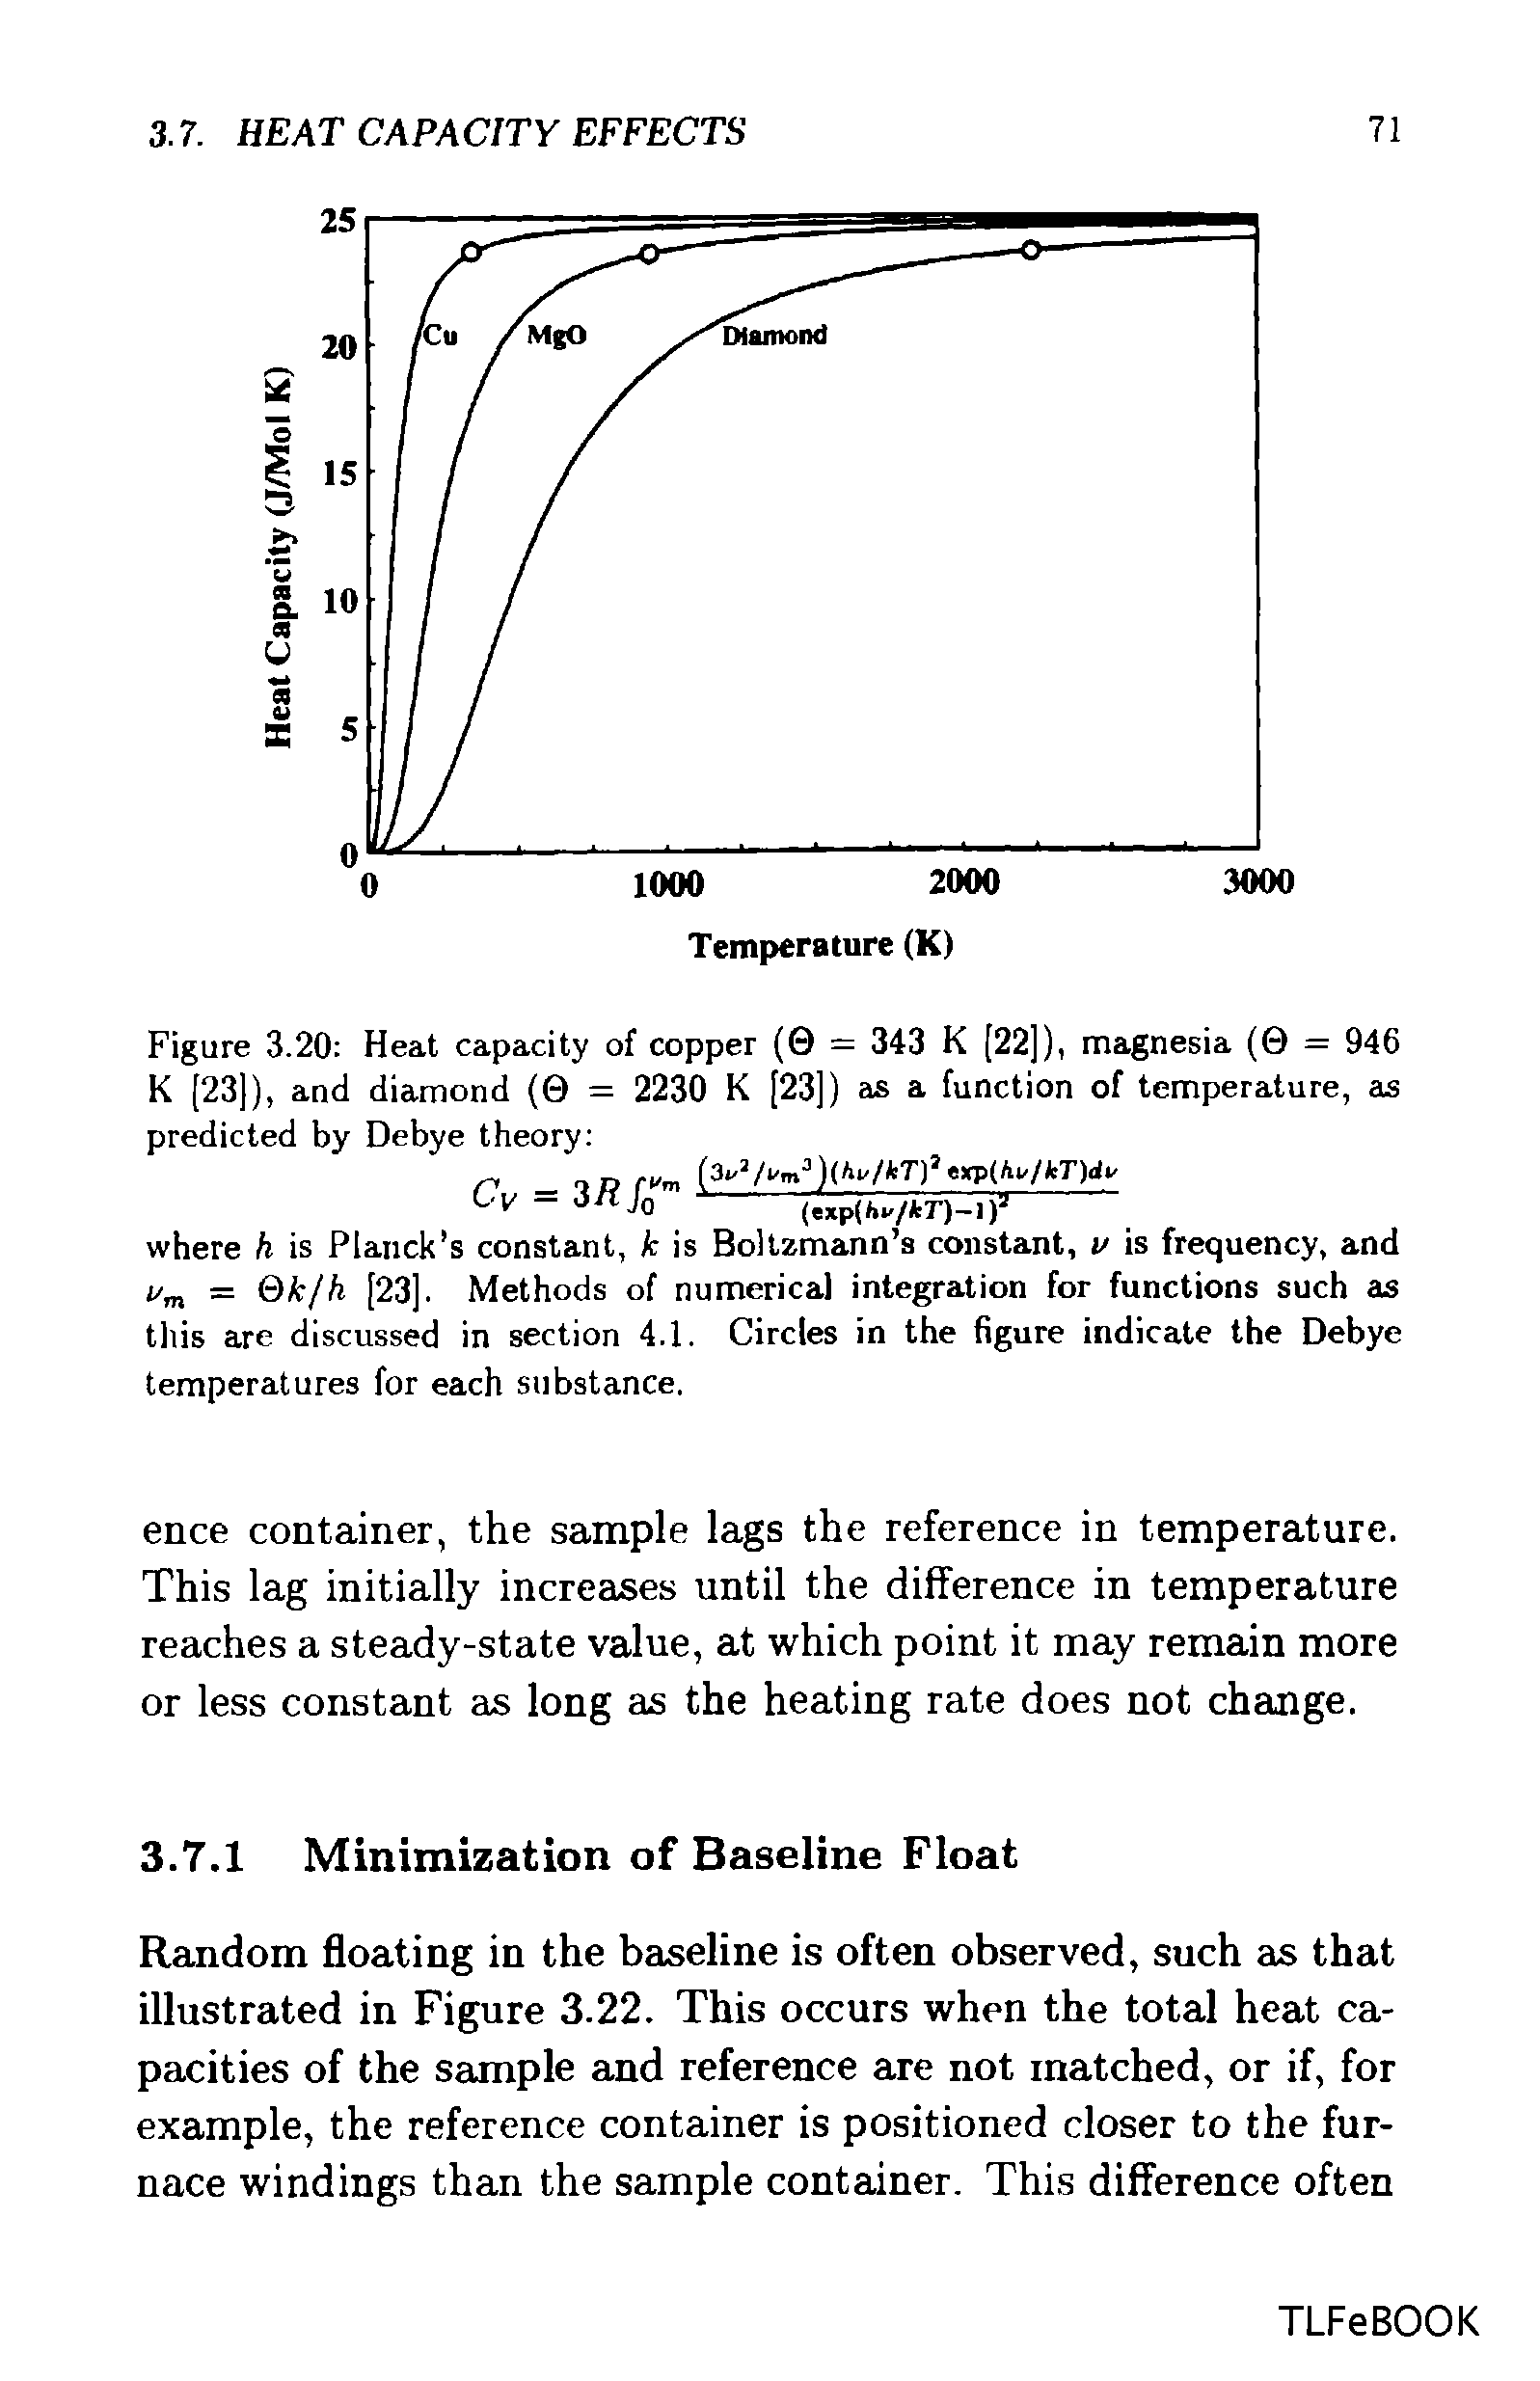 Figure 3.20 Heat capacity of copper (0 = 343 K [22]), magnesia (0 = 946 K [23]), and diamond (0 = 2230 K [23]) as a function of temperature, as predicted by Debye theory ...